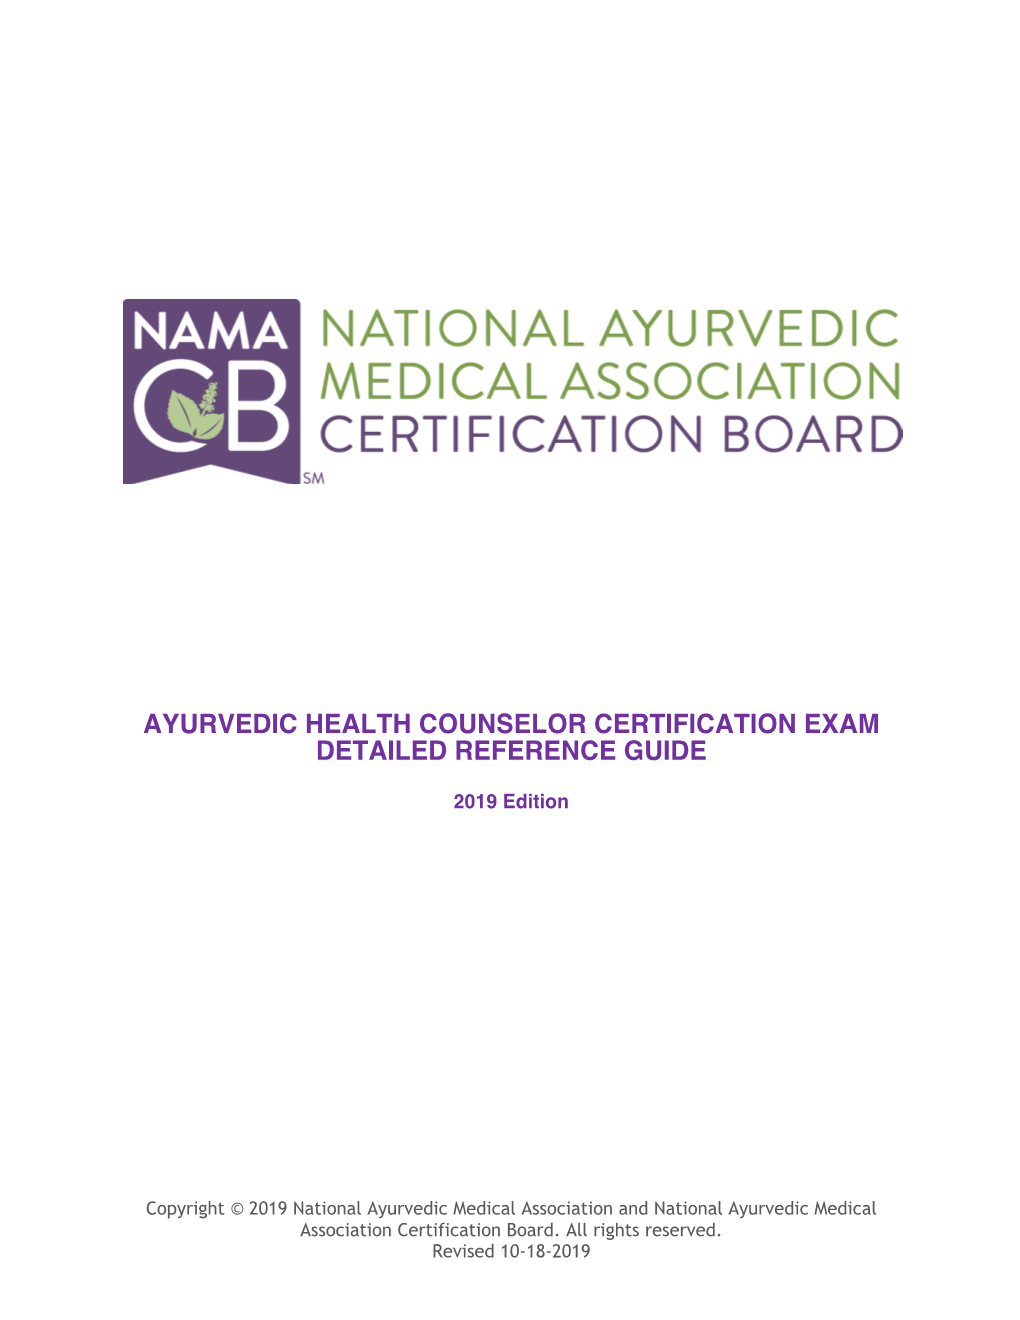 Ayurvedic Health Counselor Certification Exam Detailed Reference Guide